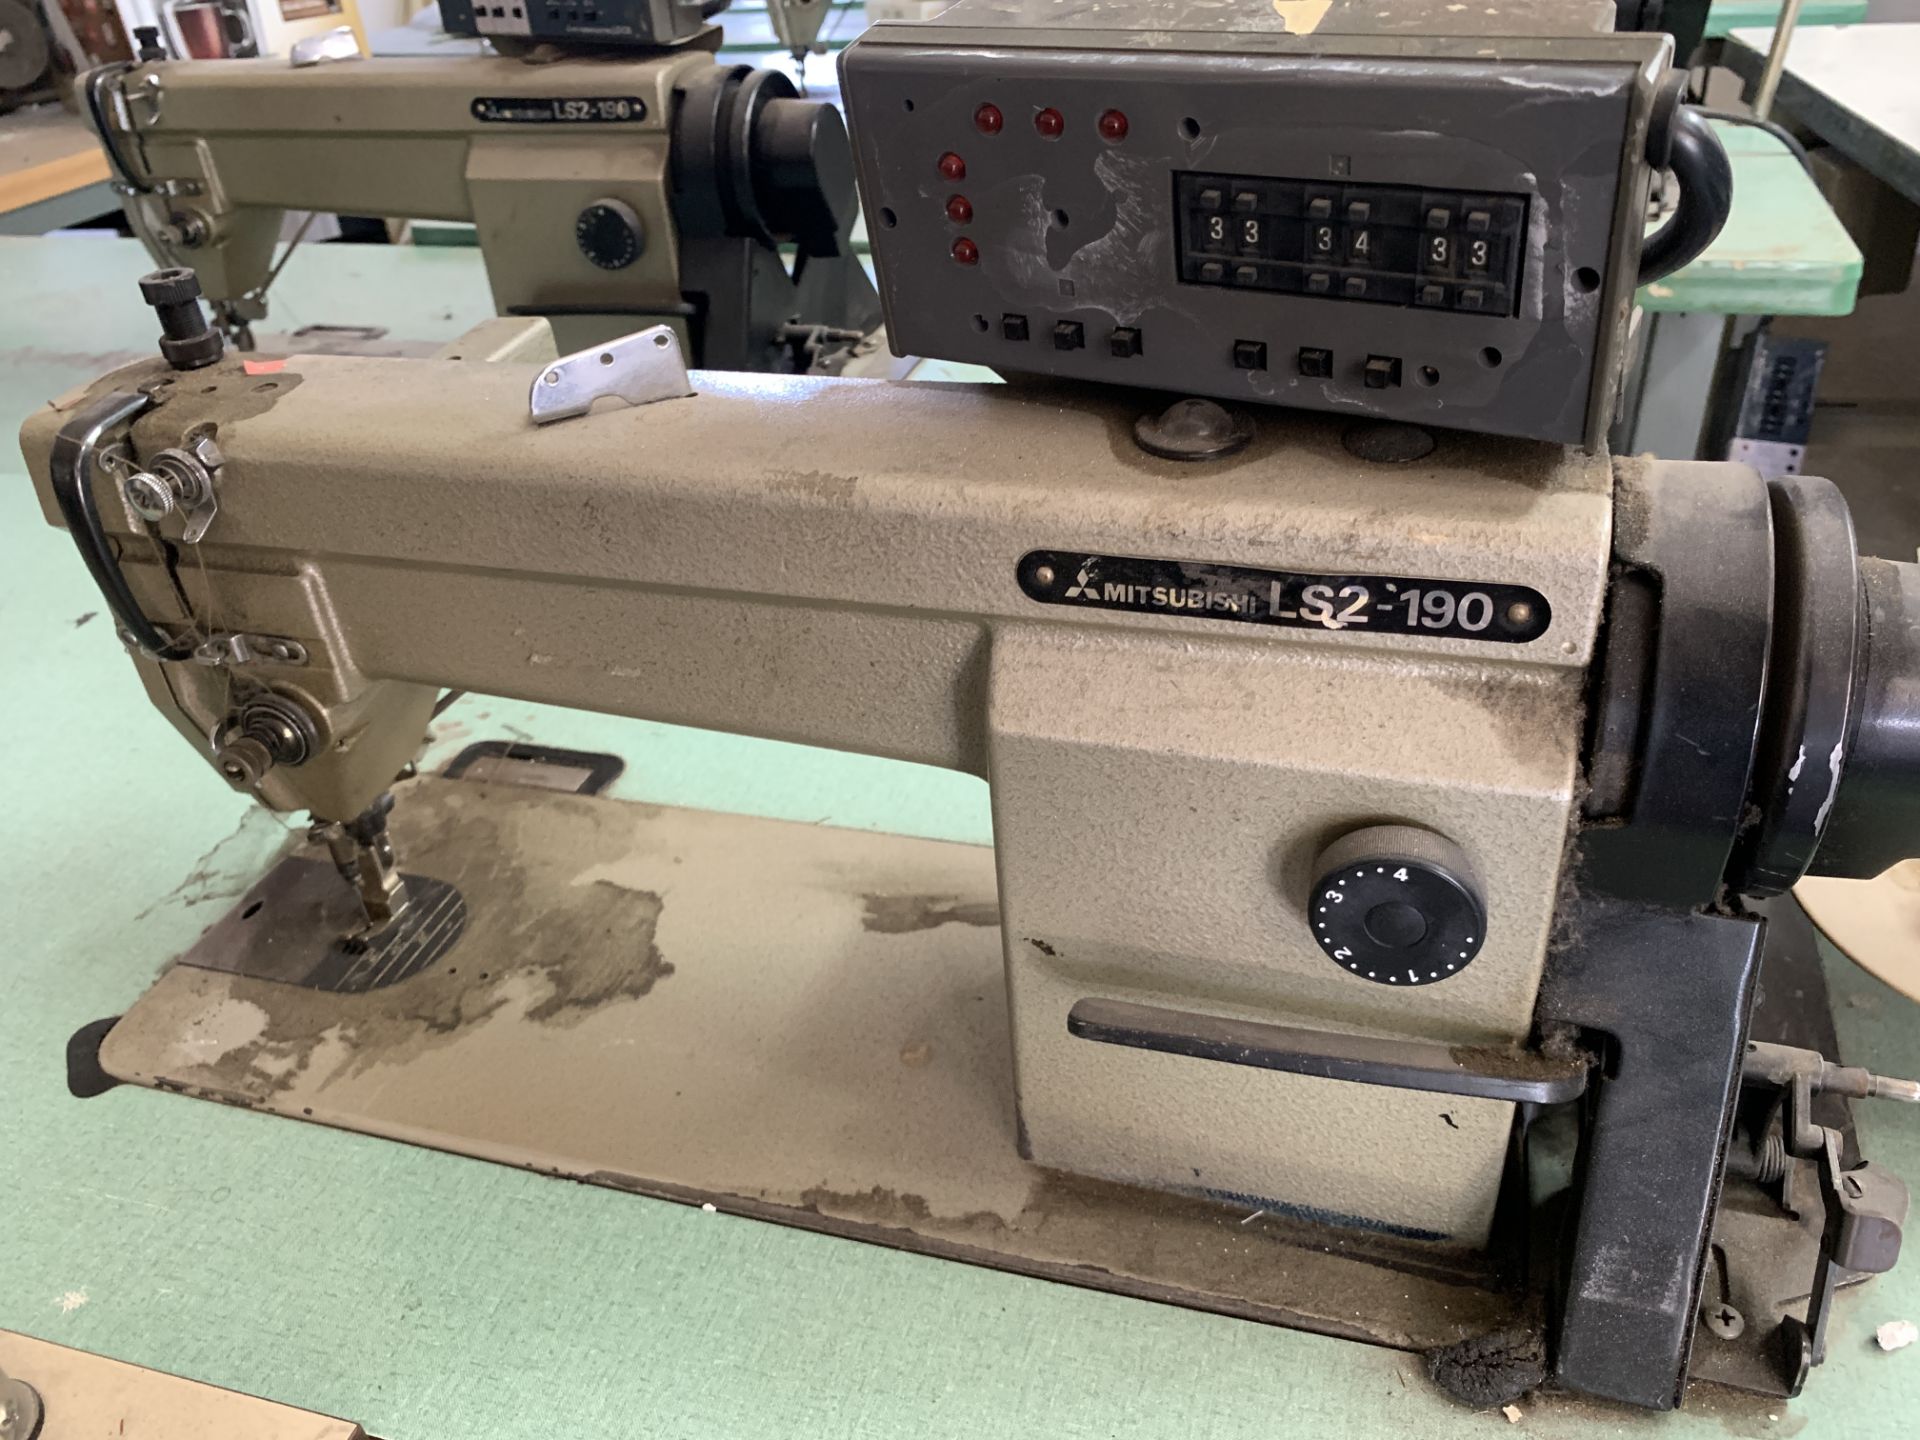 4 x Mitsubishi LT2-190 and LT2-230 2-Needle Sewing Machines, Including Tables *Las Vegas Pick Up - Image 13 of 17